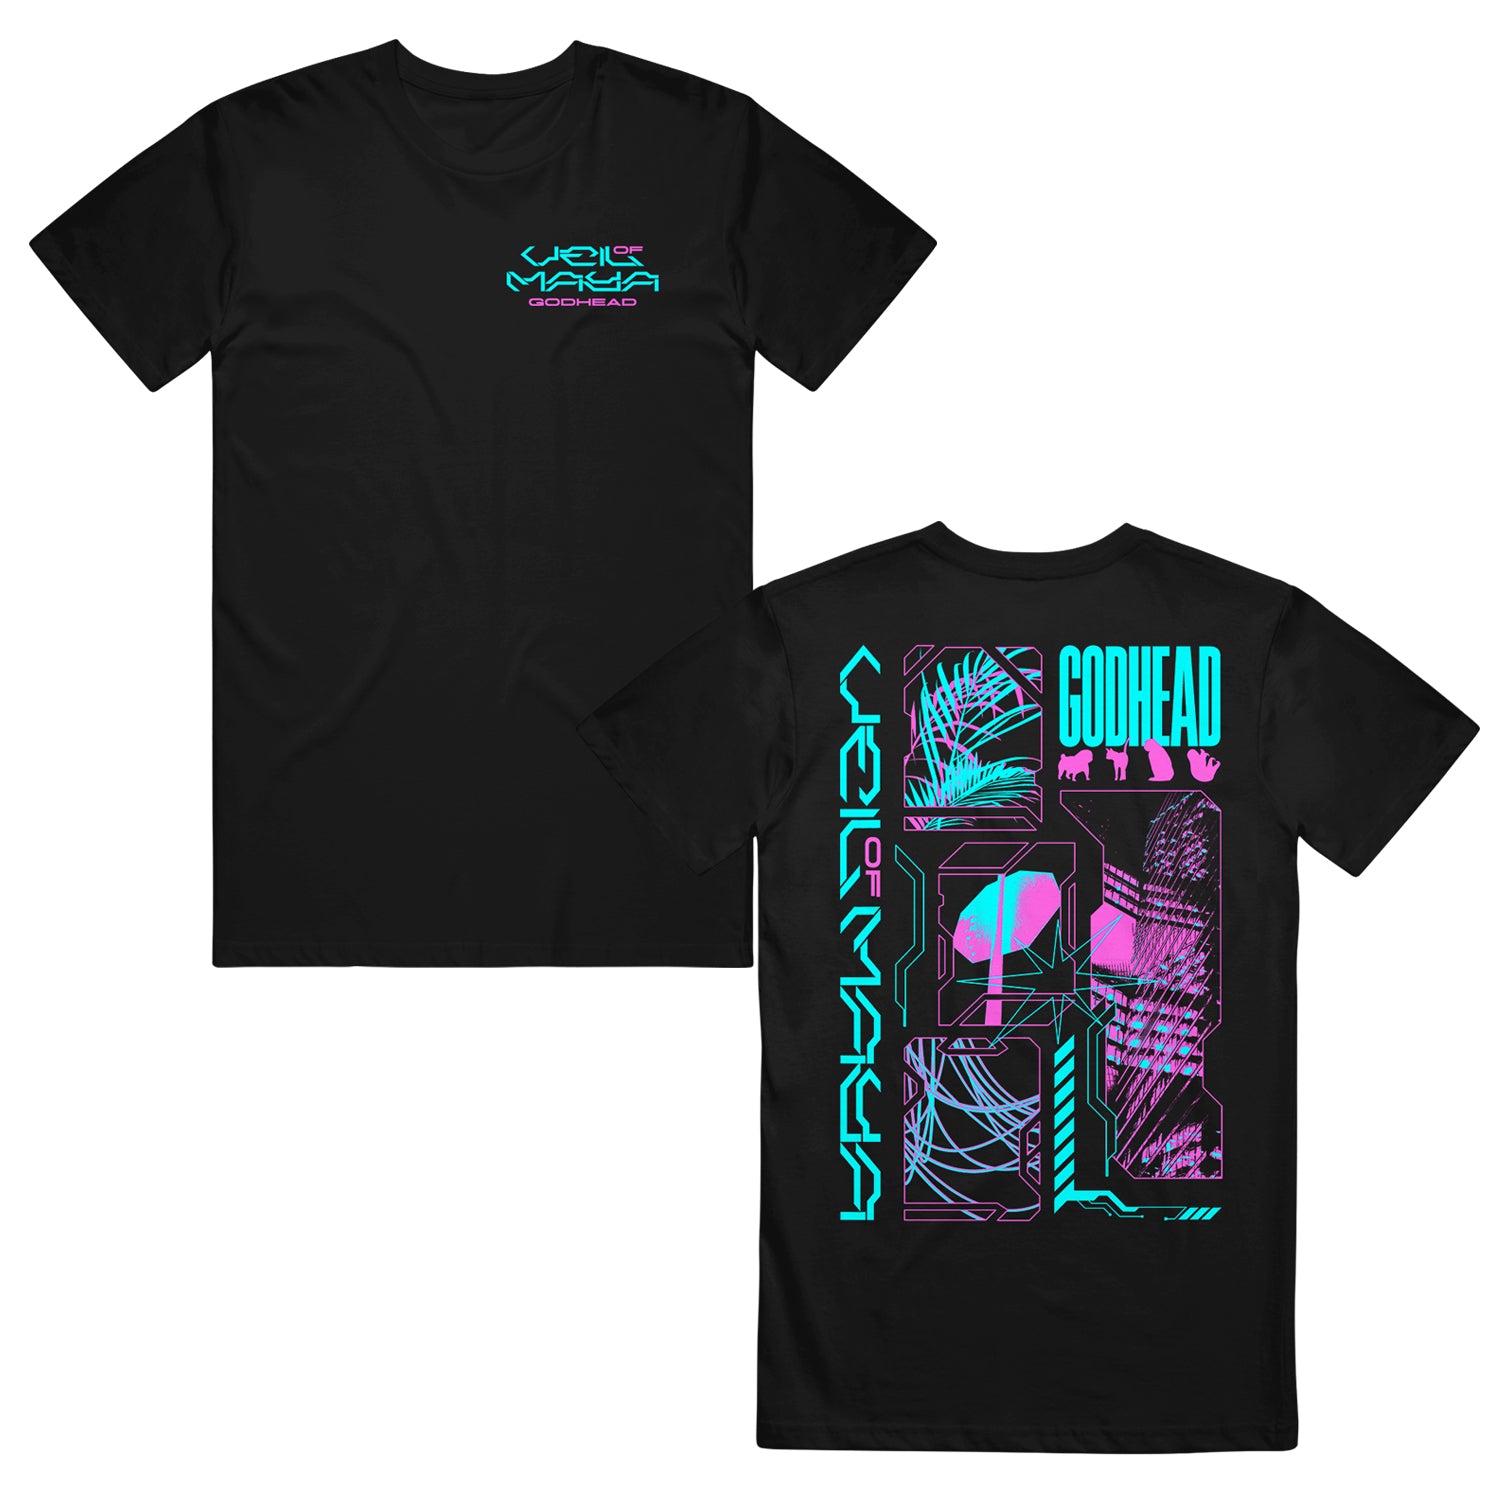 image of the front and back of a black tee shirt on a white bacground. front of tee is on the left and has a small print on the right chest that says veil of maya, vaporware. the back of the tee is on the rght and has a full back print that says veil of maya and godhead with some designs and palm leaves